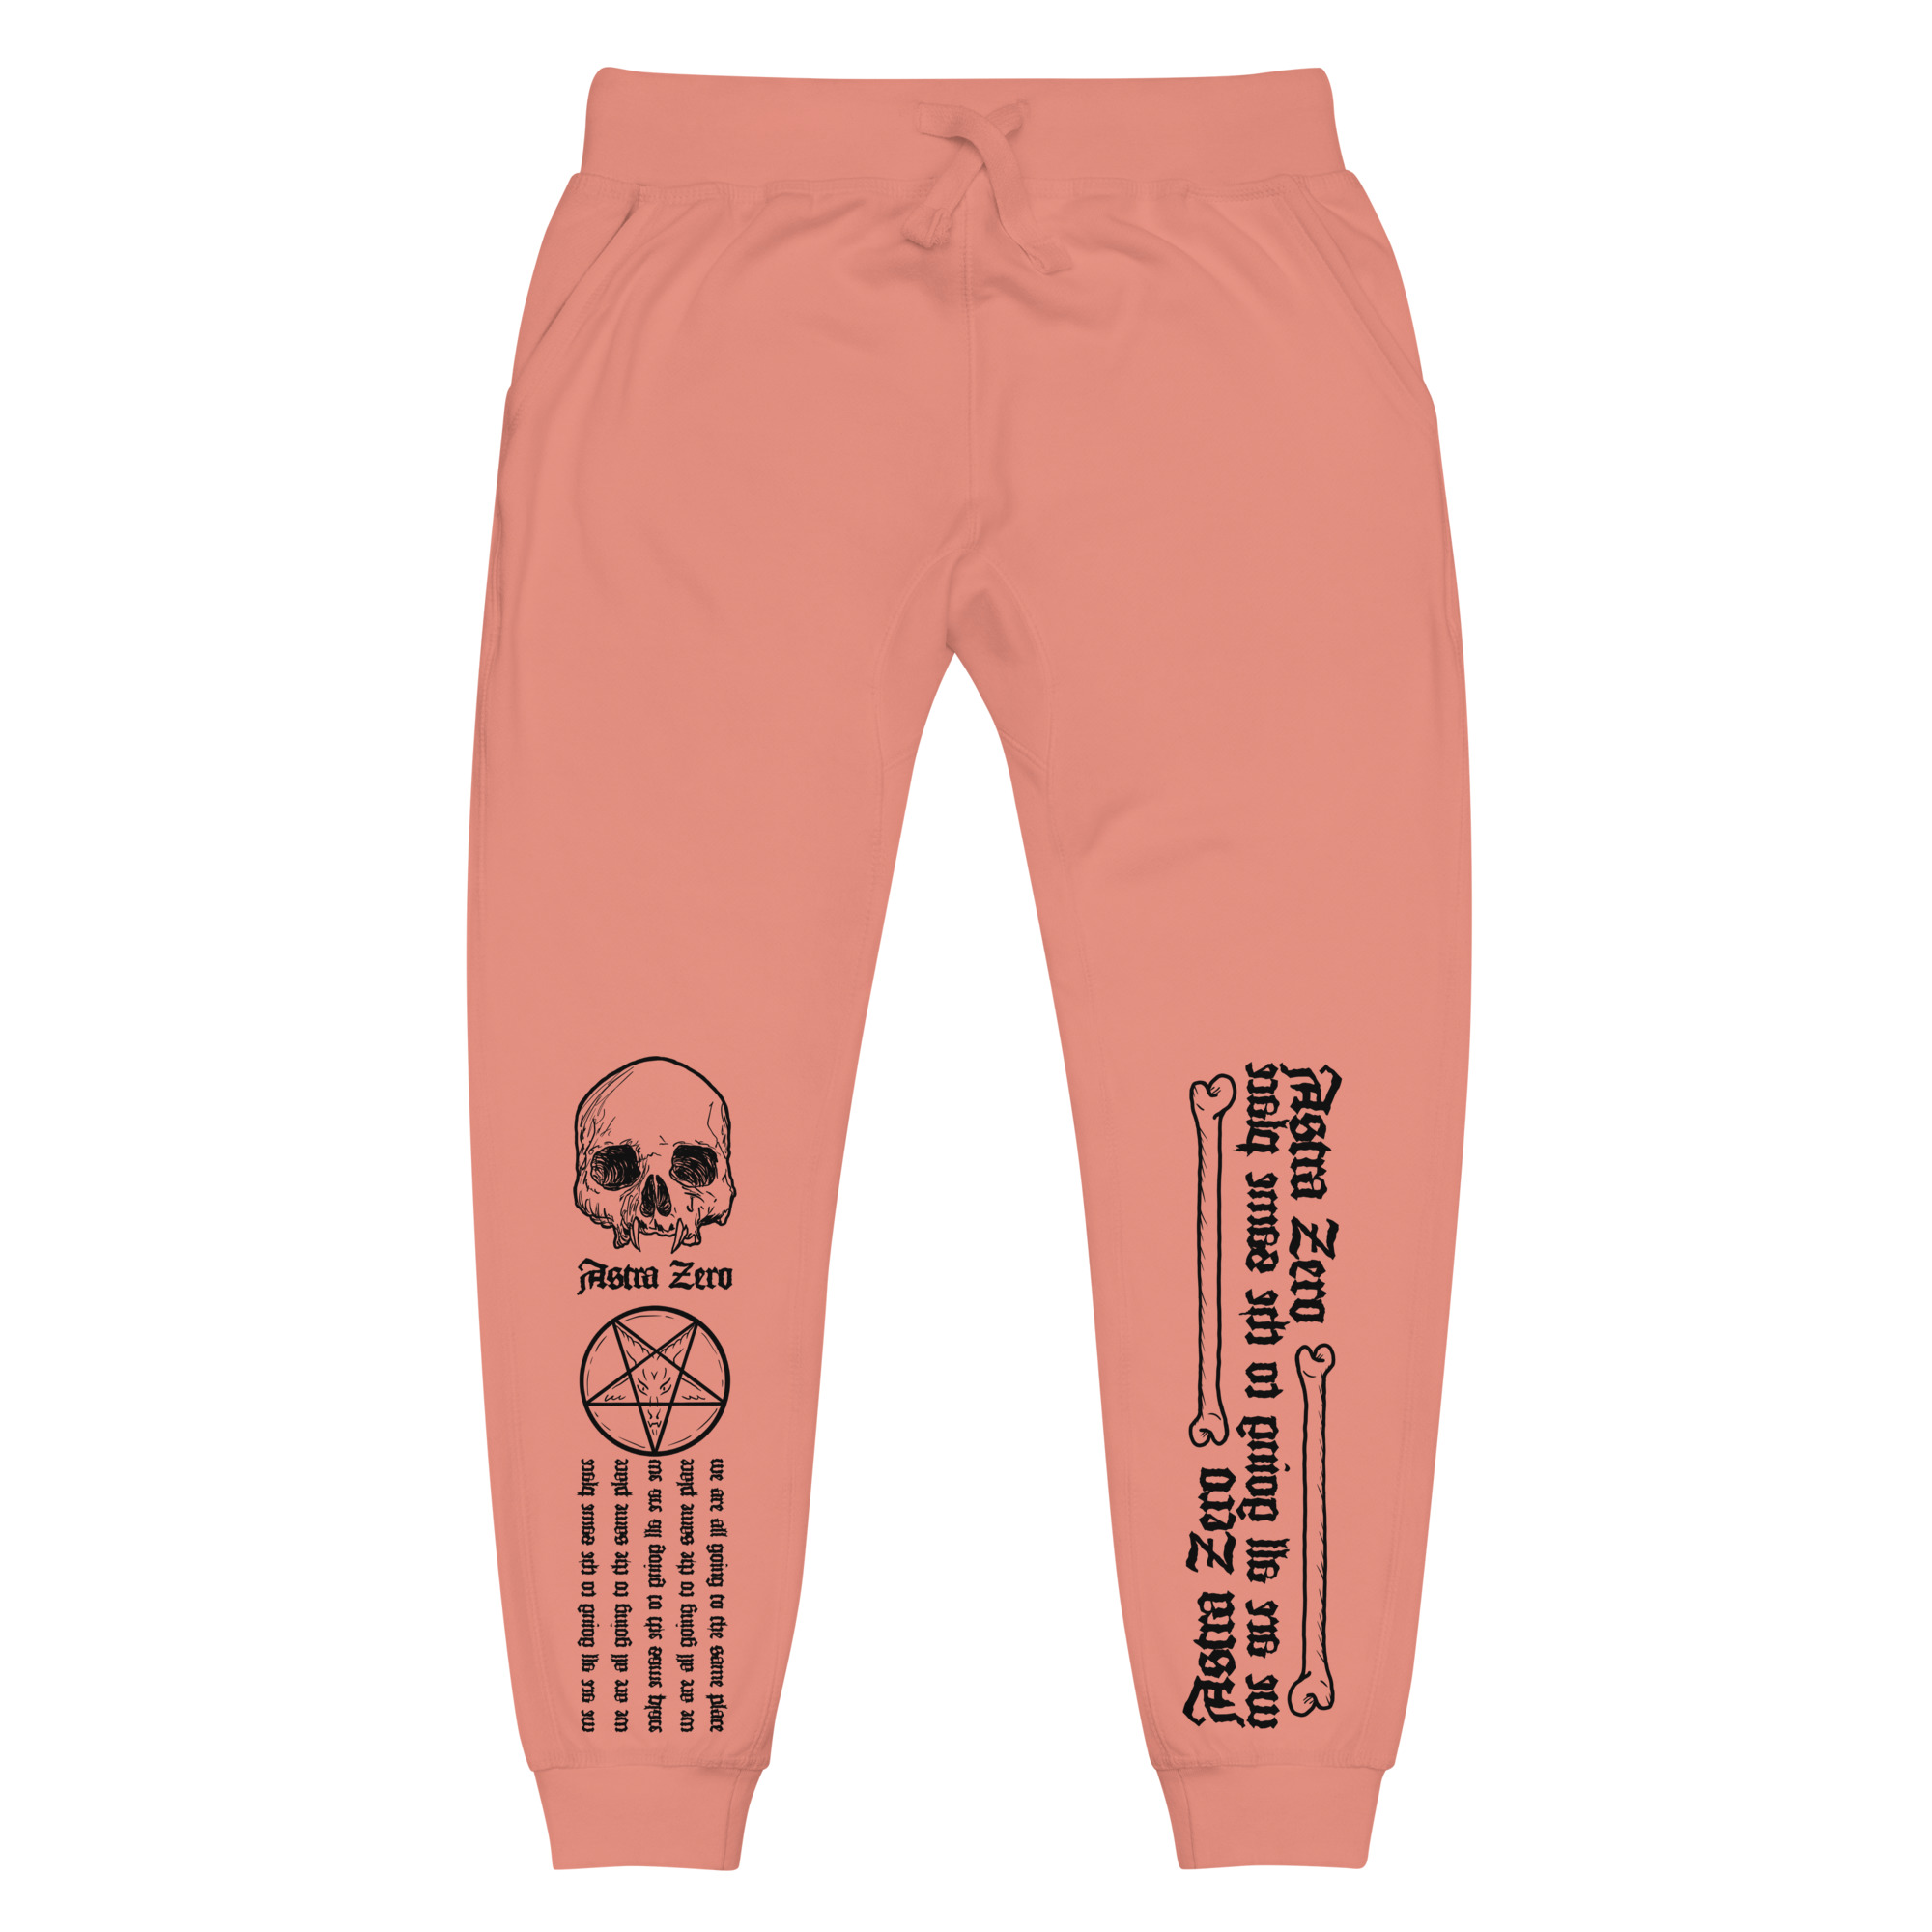 Featured image for “We are all going to the same place - Unisex fleece sweatpants”